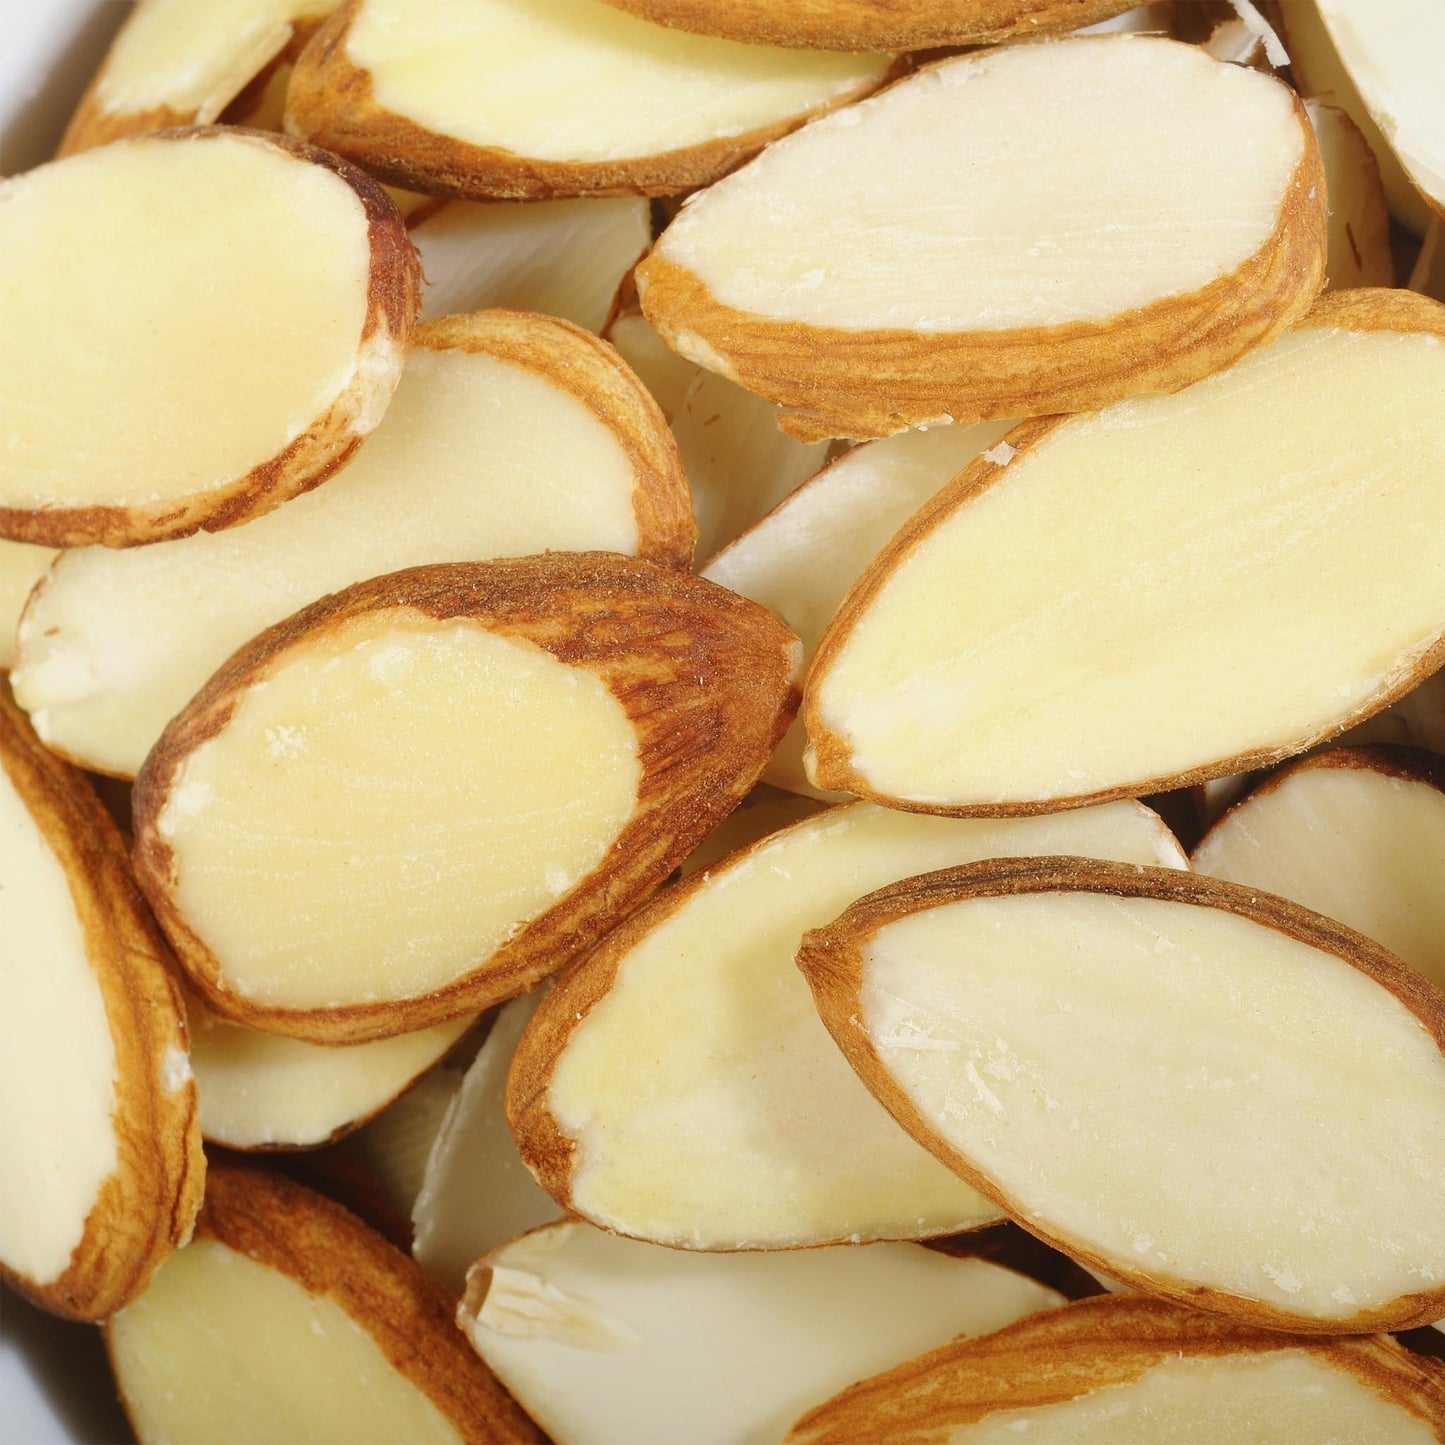 Sliced Almonds (Natural With Skin)